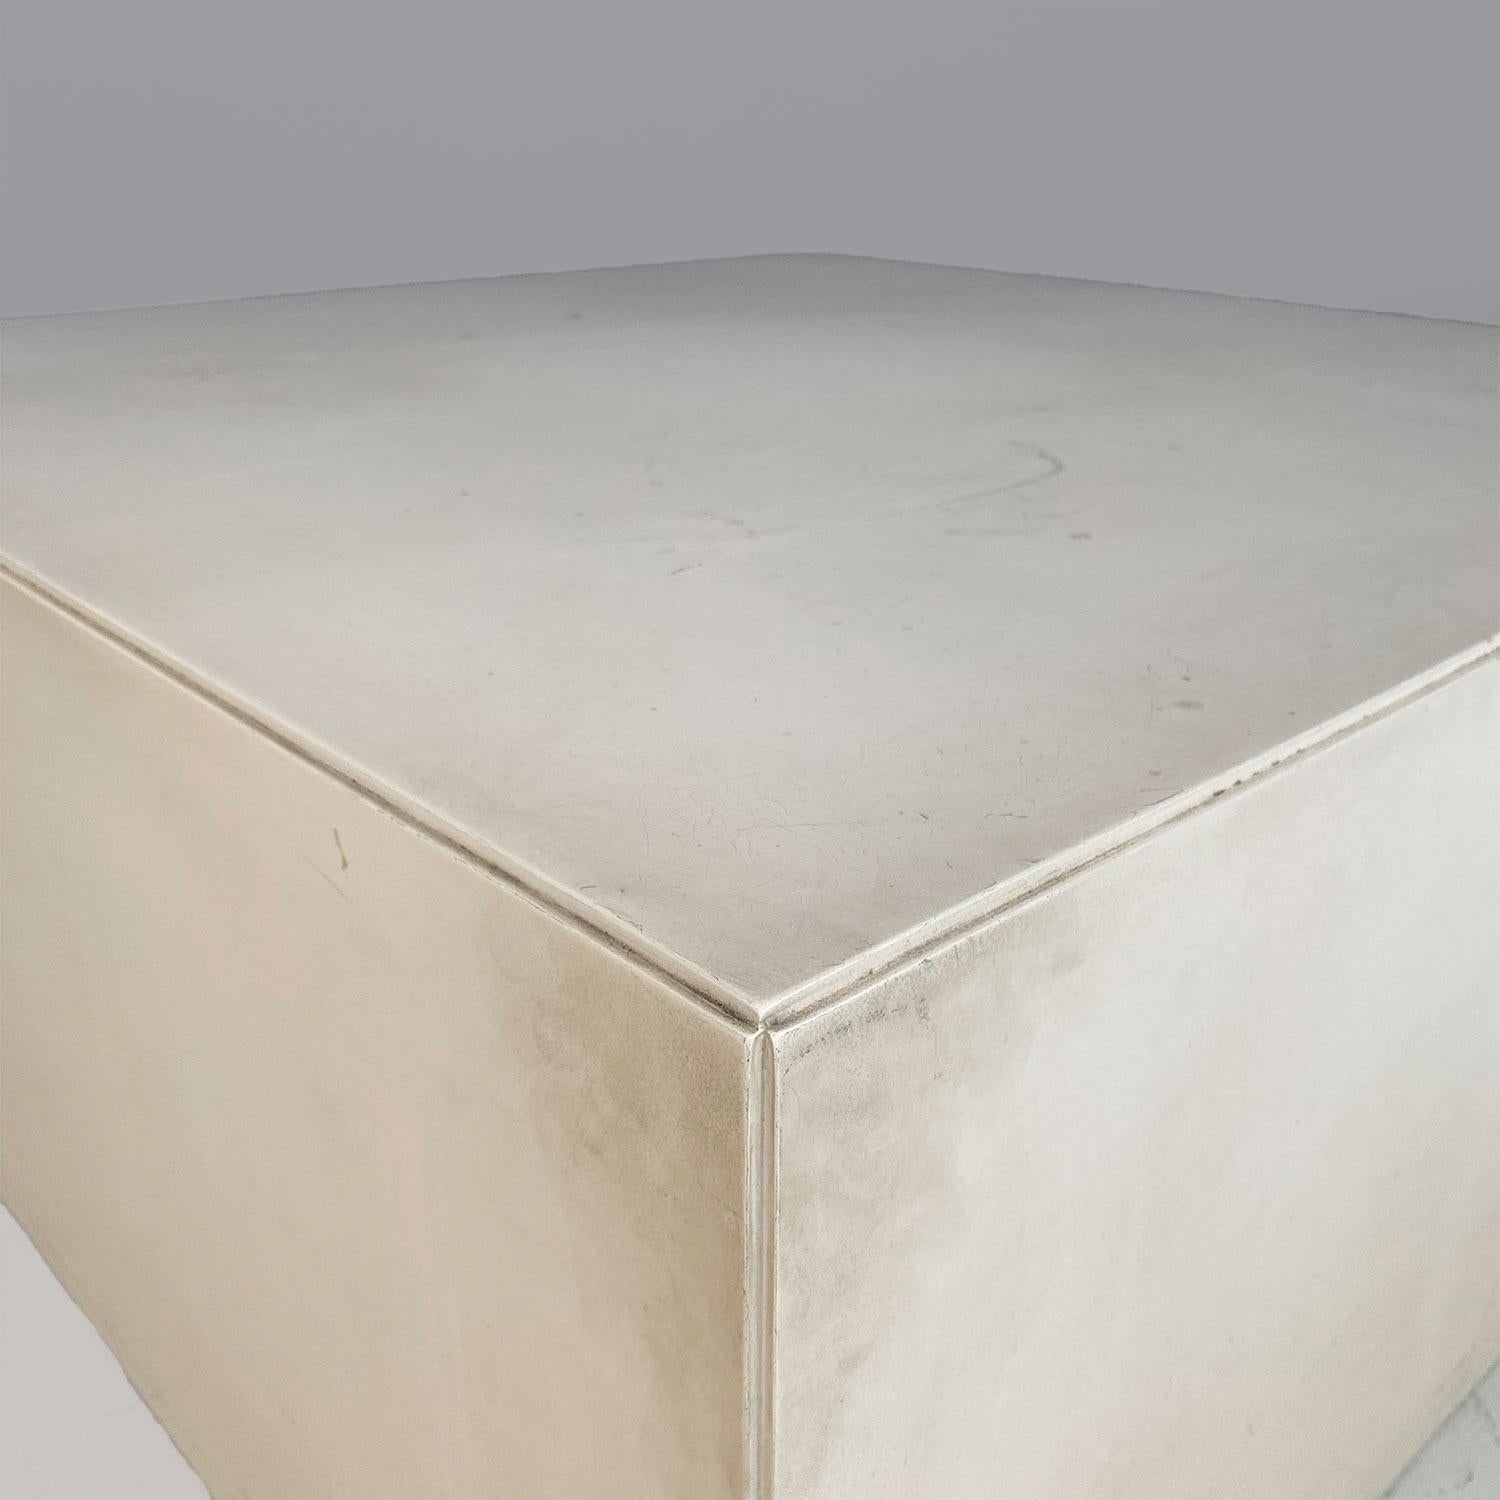 Italian modern white wooden parallelepiped-shaped pedestal or table, 1970s For Sale 1